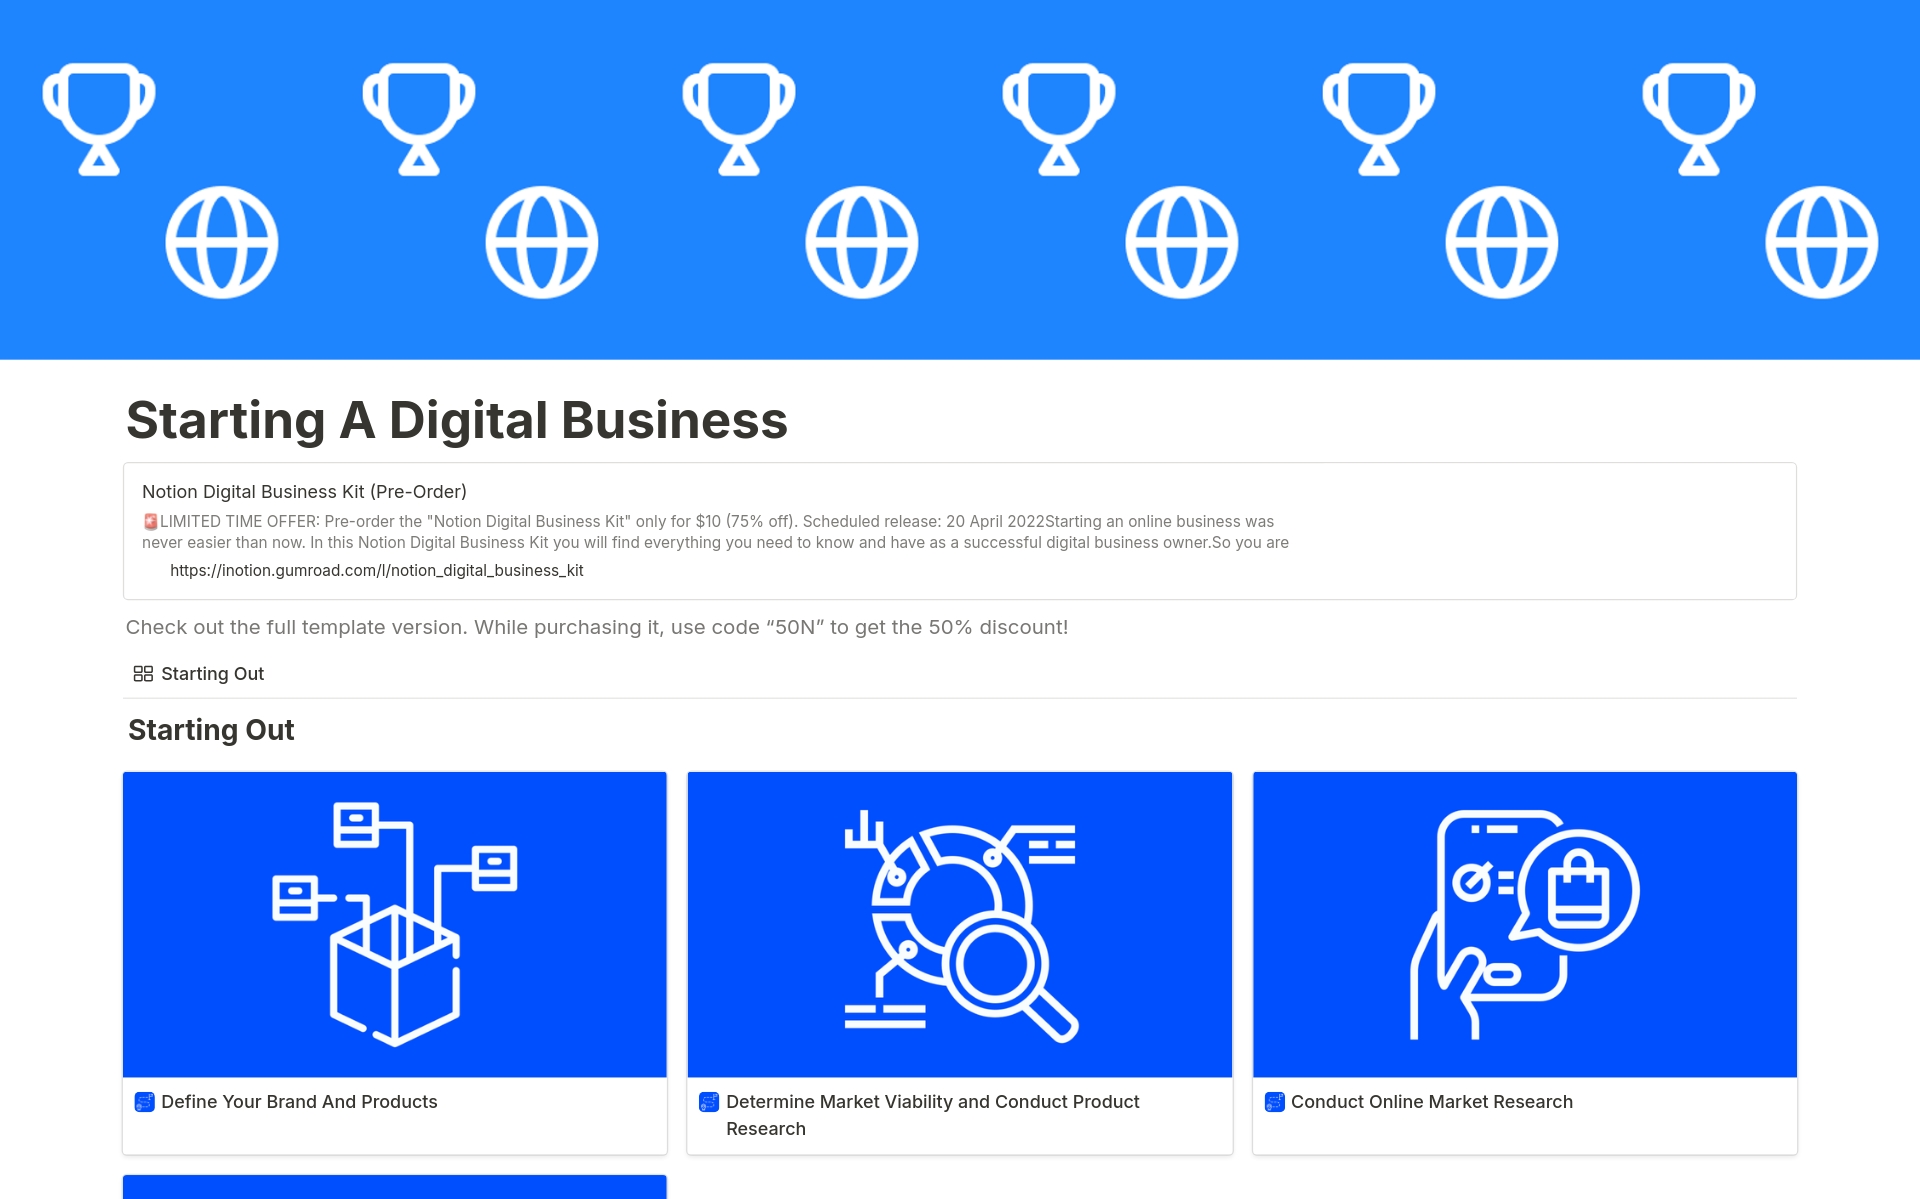 Get the awesome lessons about starting a digital business right within Notion.